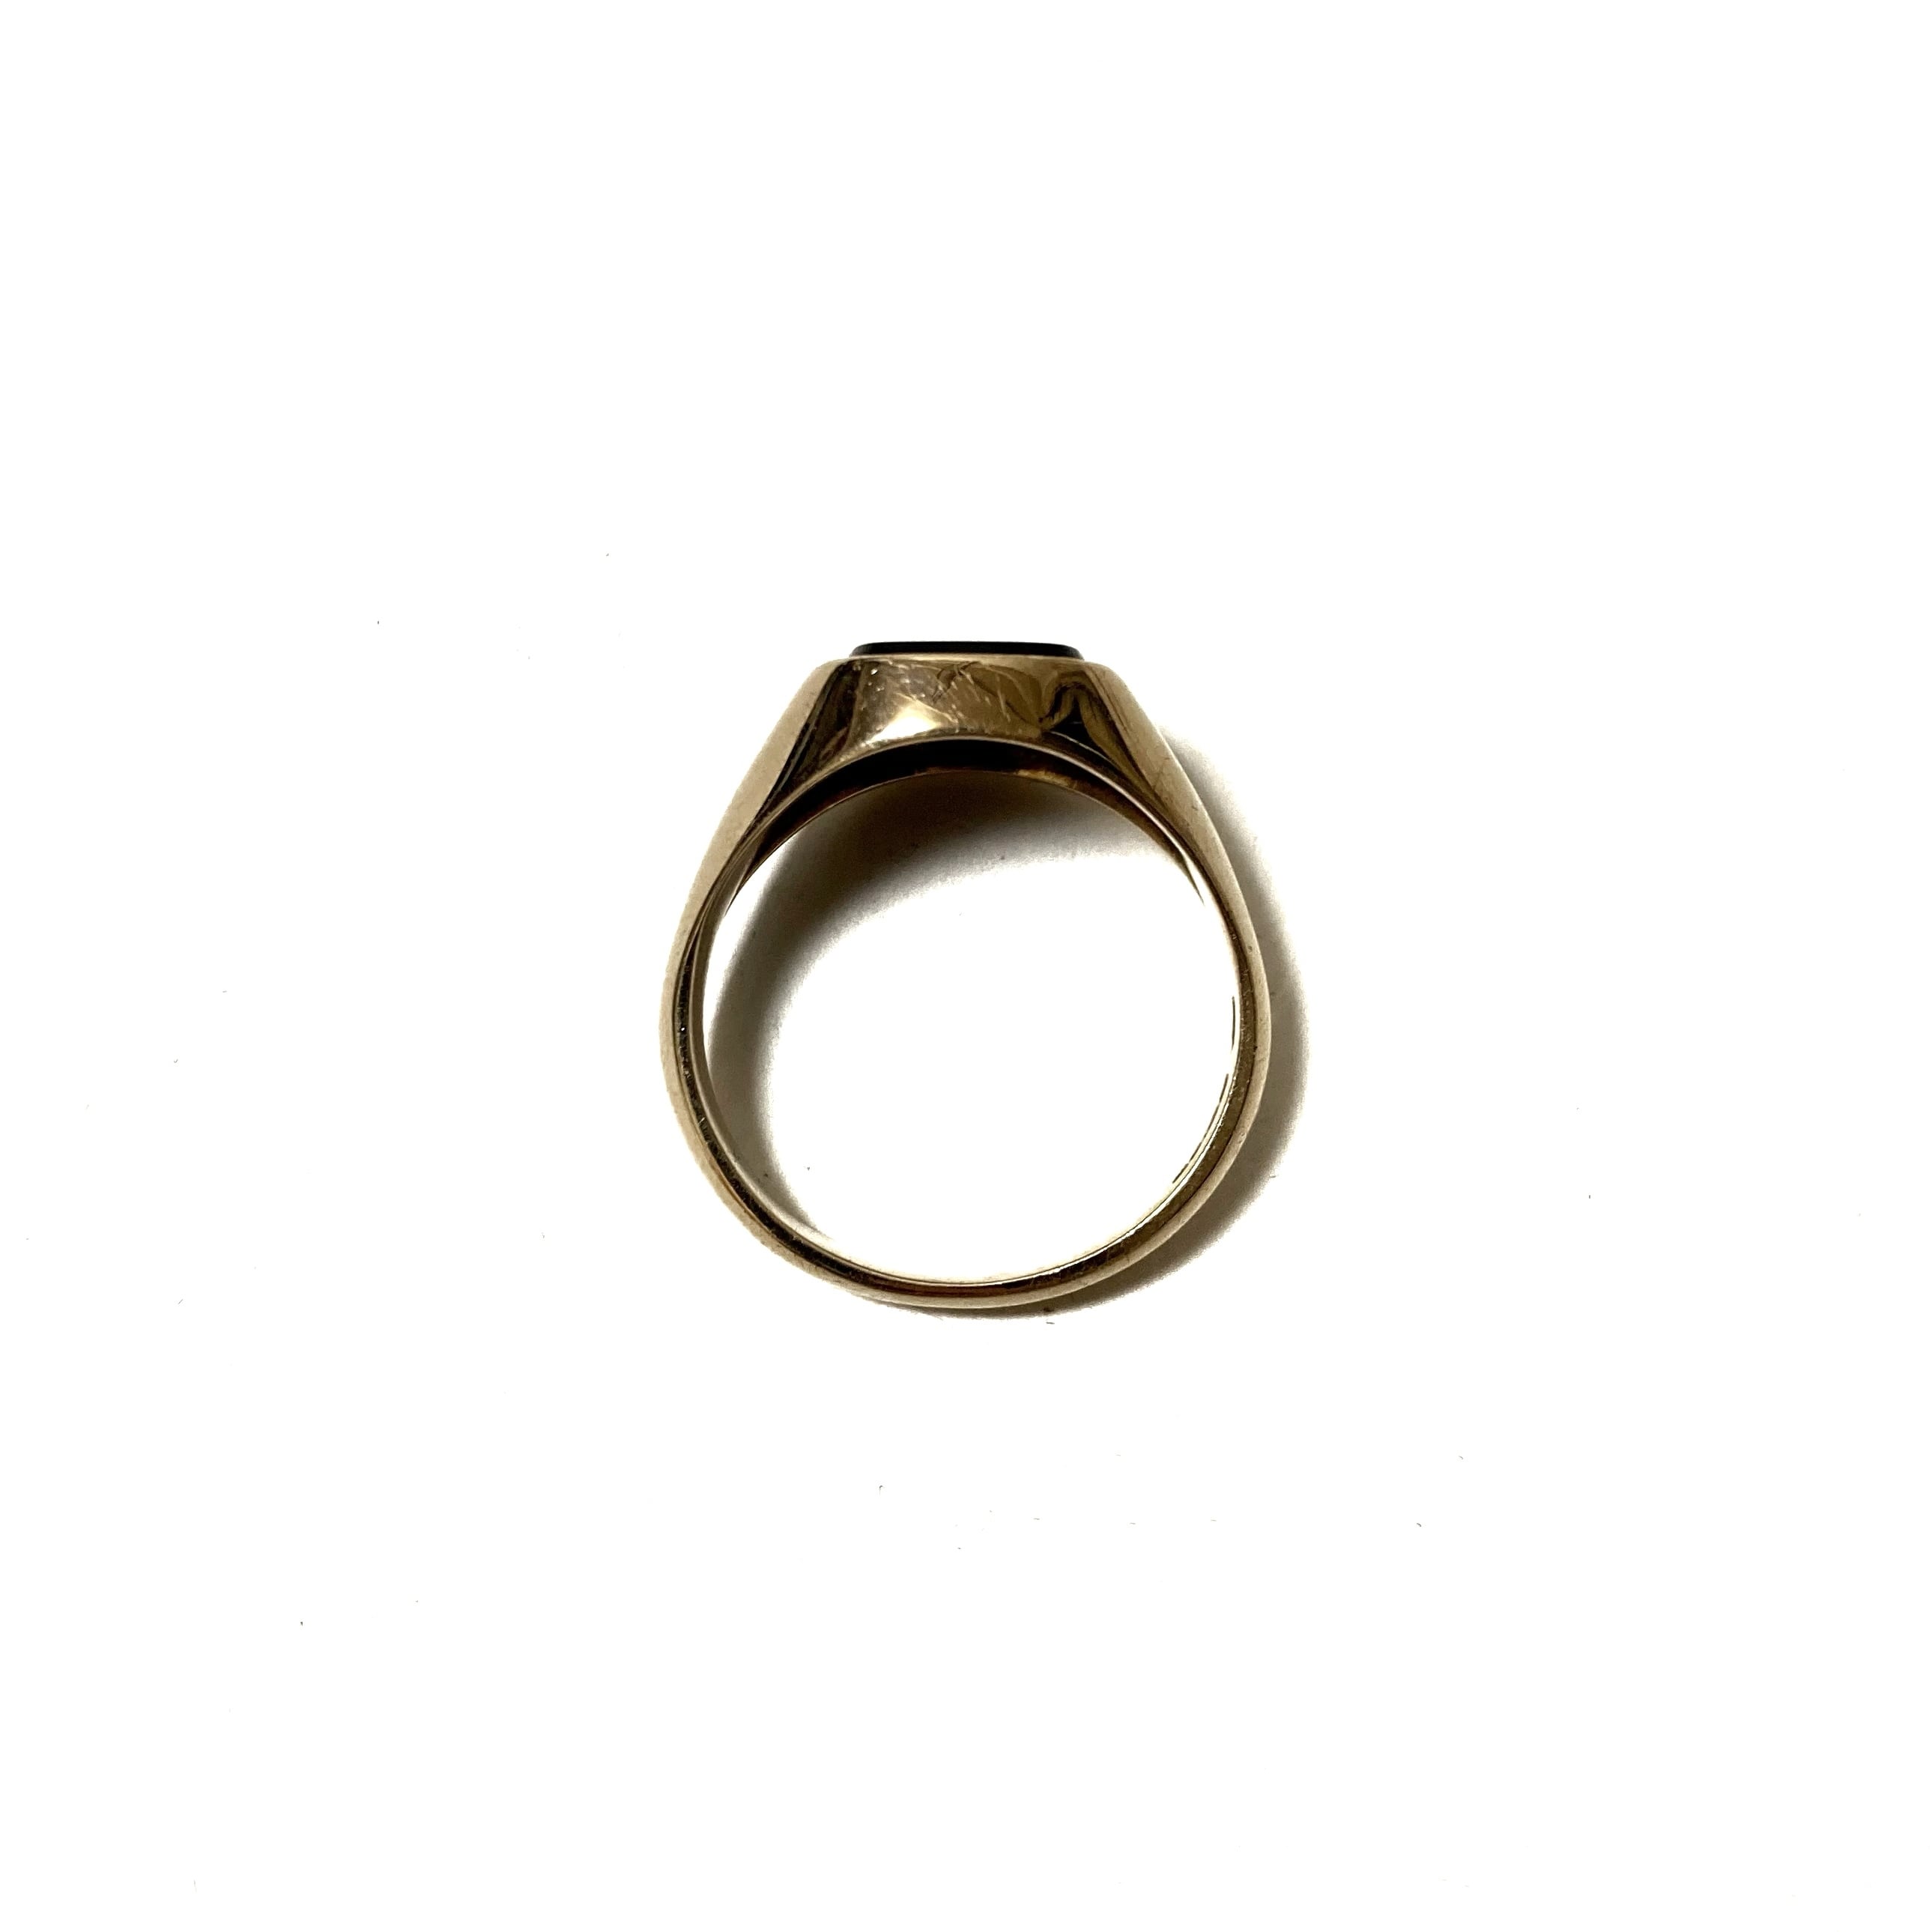 England Vintage 9ct Gold Ring